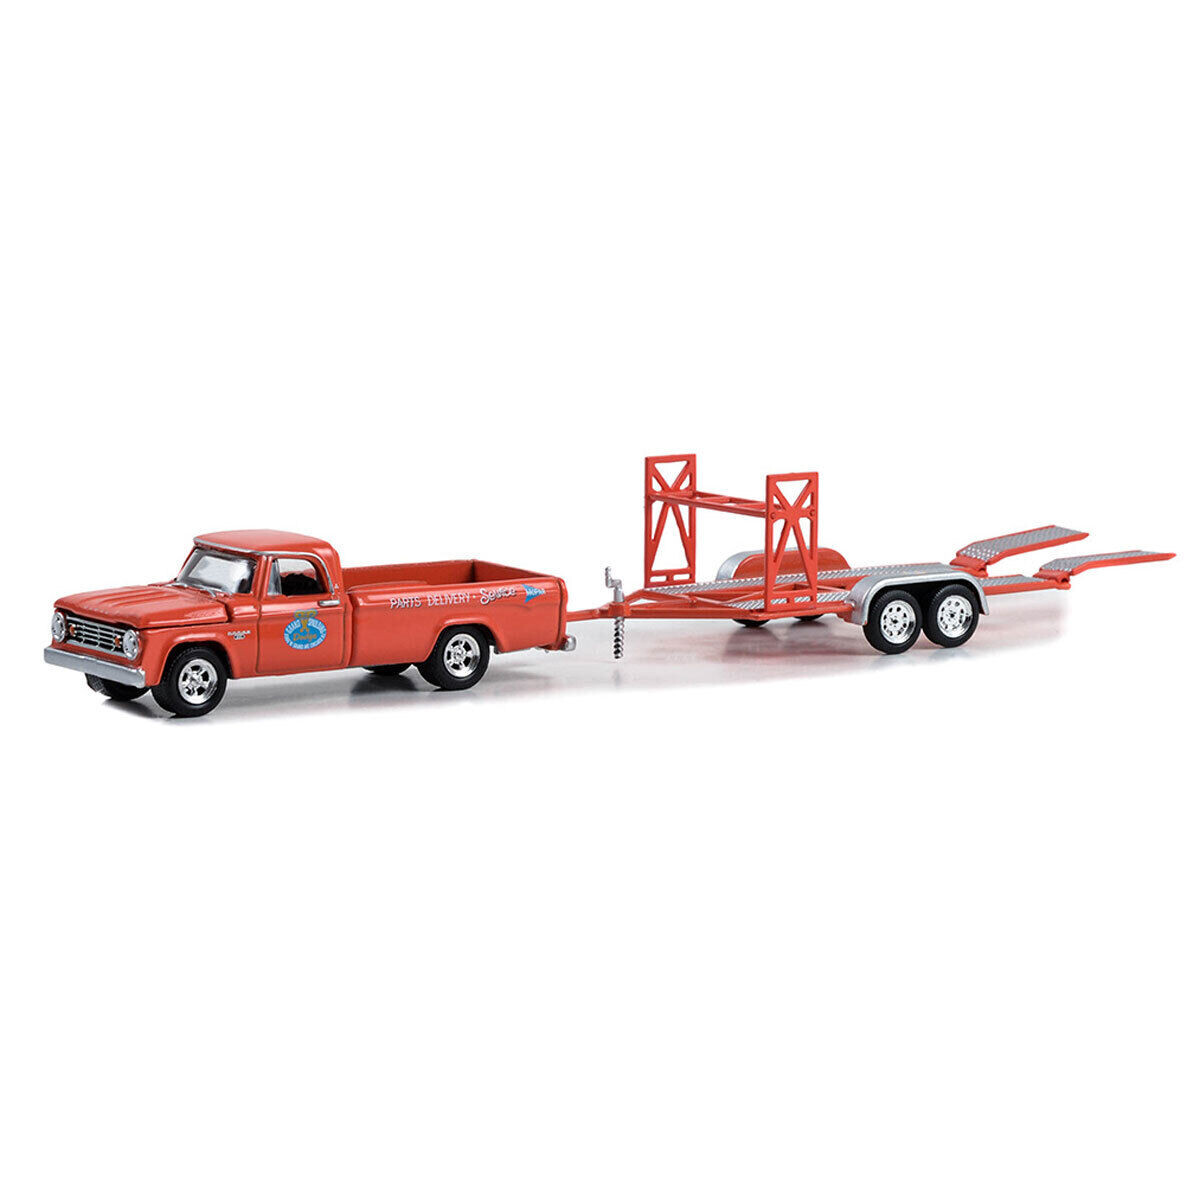 Greenlight 1/64 Hitch & Tow Series 29- 1967 Dodge D-100 - Mr. Norm's Grand Spaulding Dodge with Tandem Car Trailer 32290-A - Thumbnail